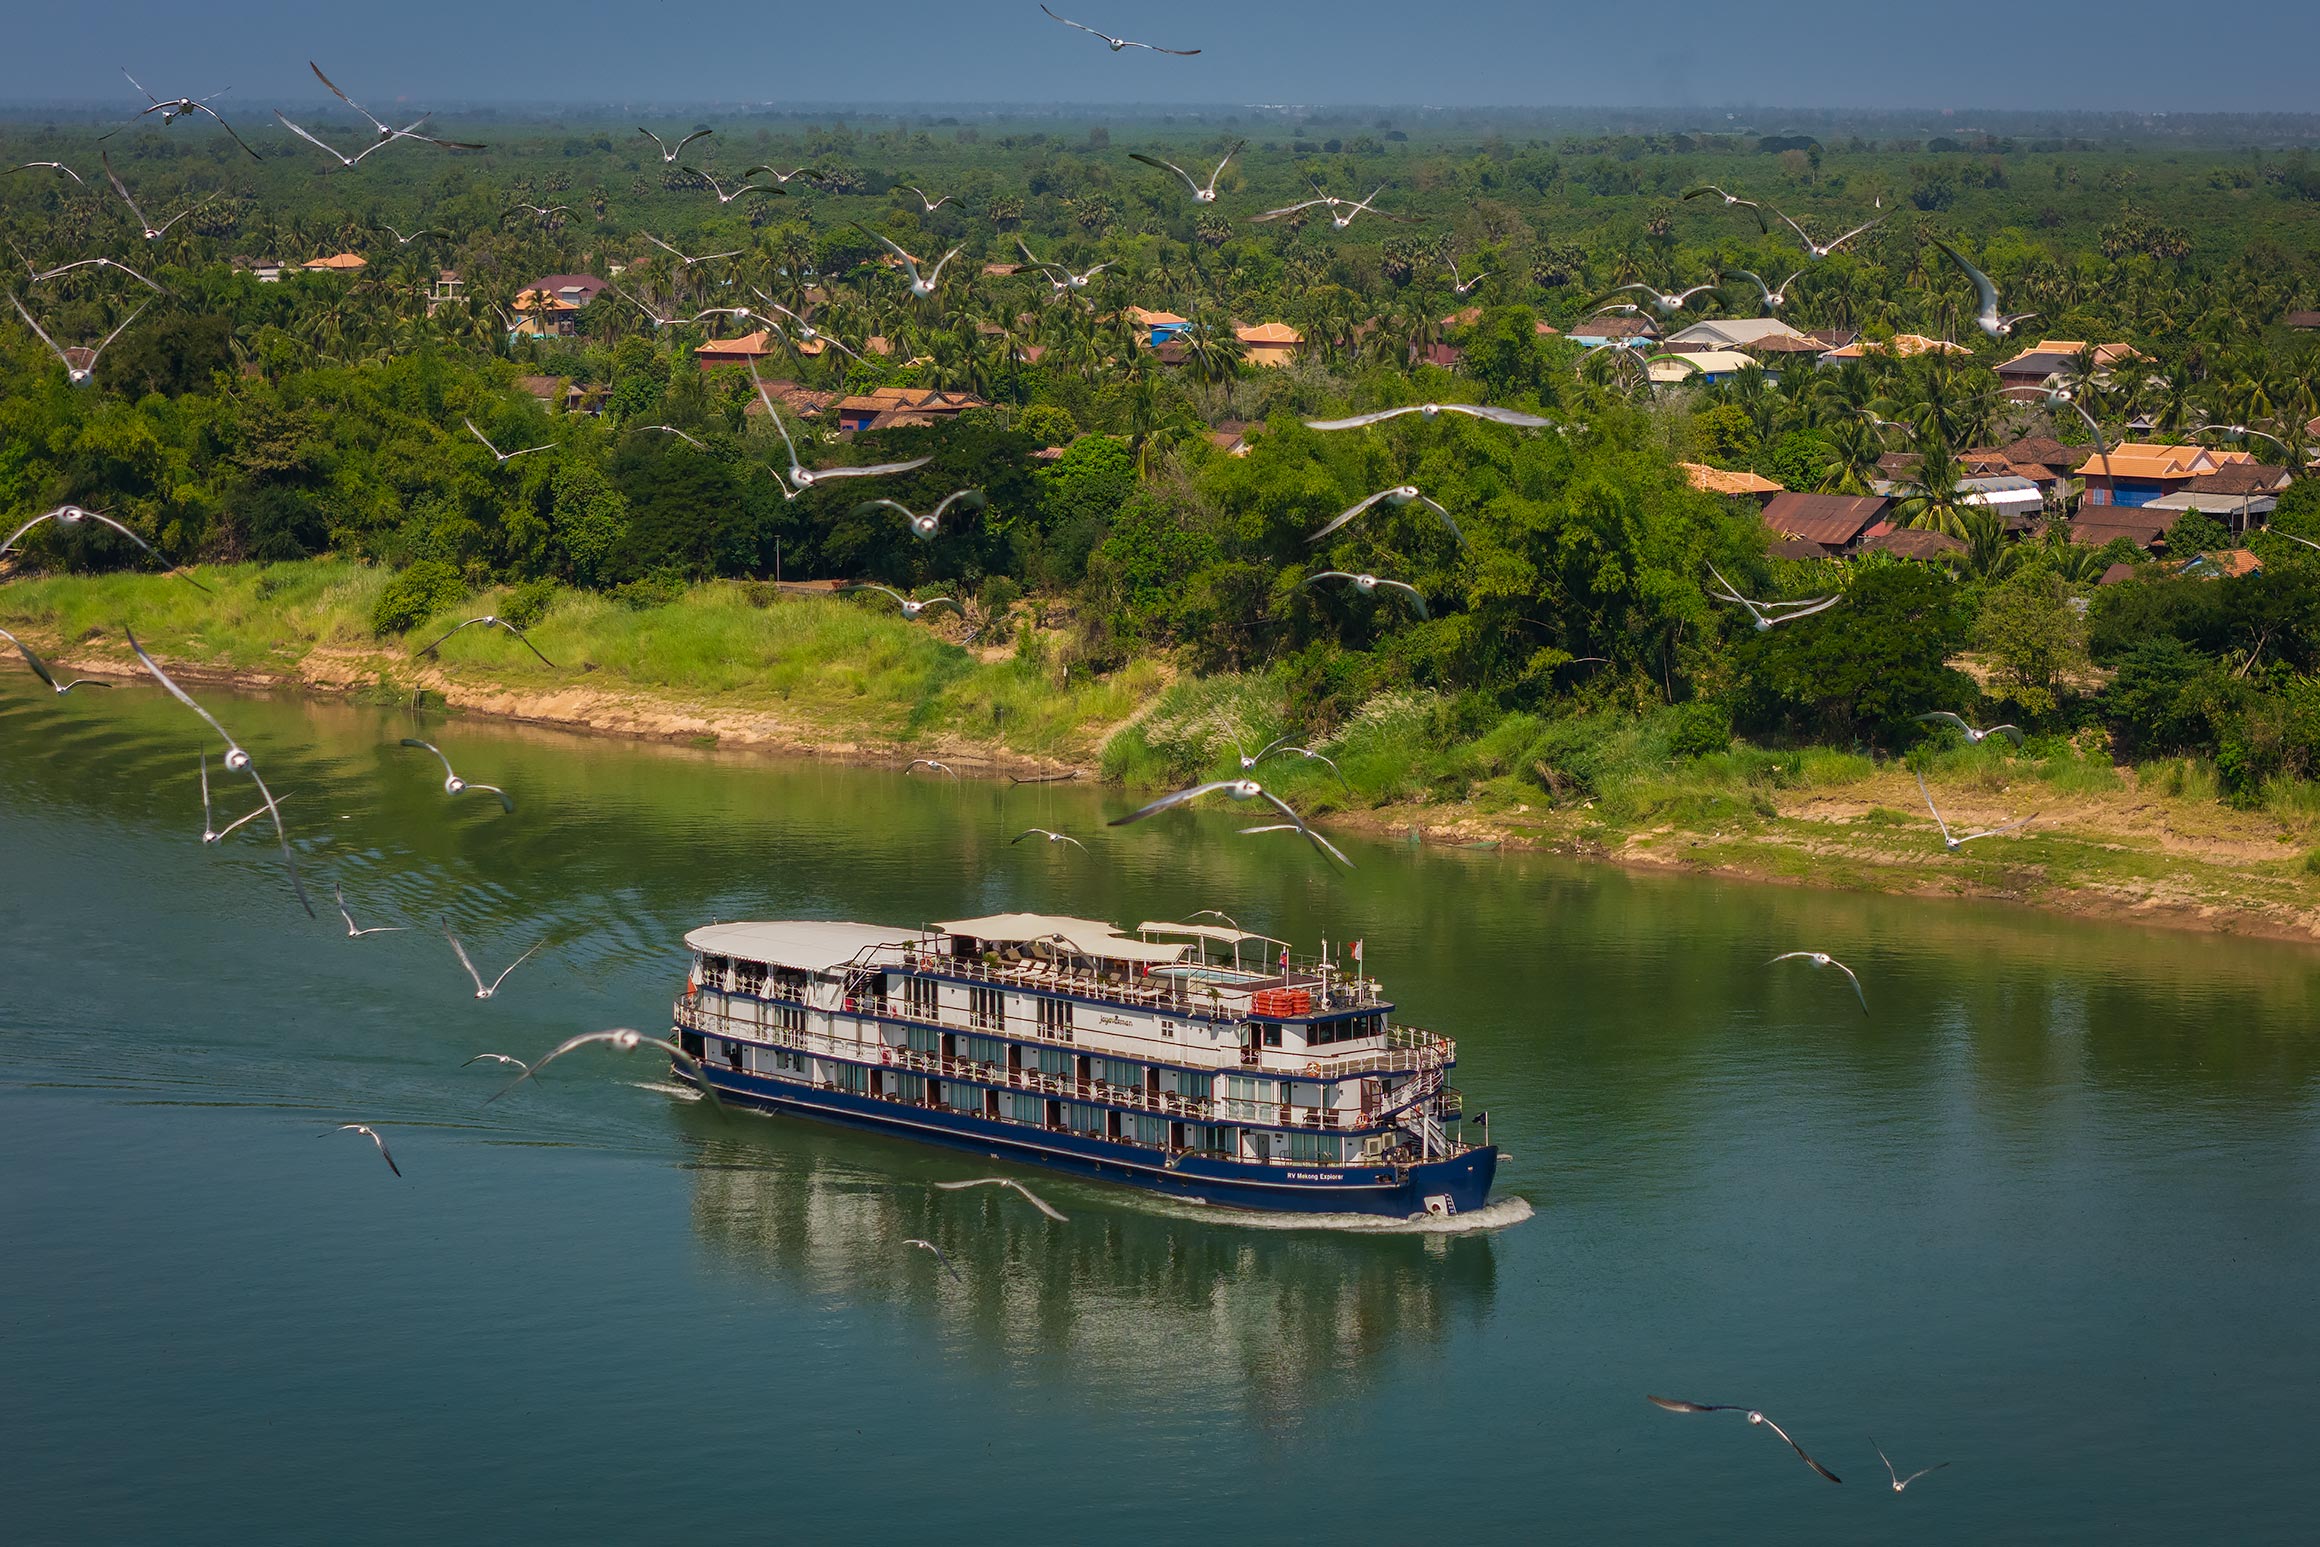 Cambodian luxury cruise ship along Cambodian countryside | Drone Photographer in Phnom Penh